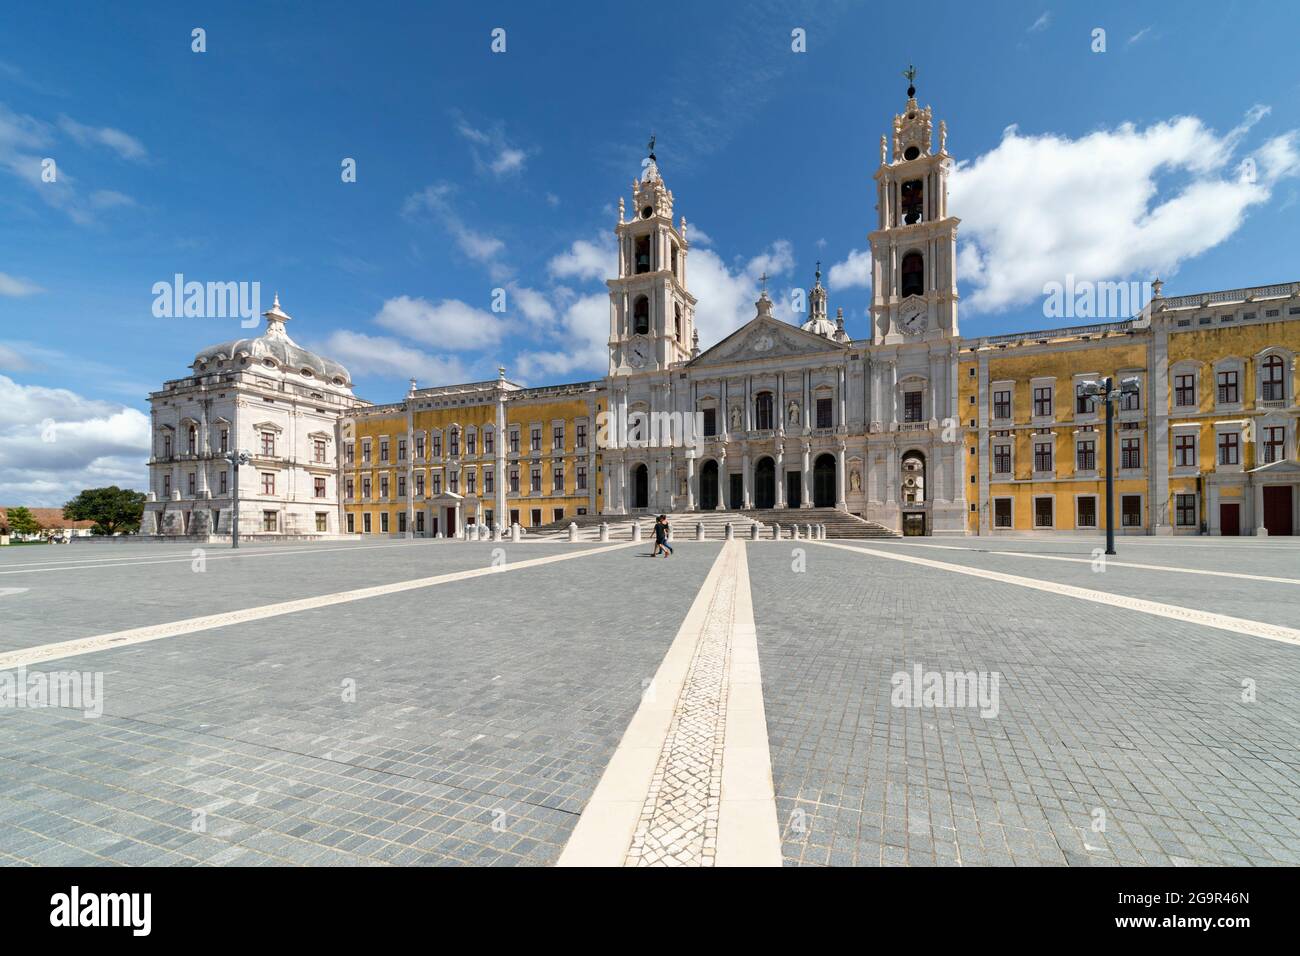 The main facade of The Palace of Mafra, Lisbon district, Portugal.  It is also known as the Palace-Convent of Mafra and the Royal Building of Mafra. Stock Photo